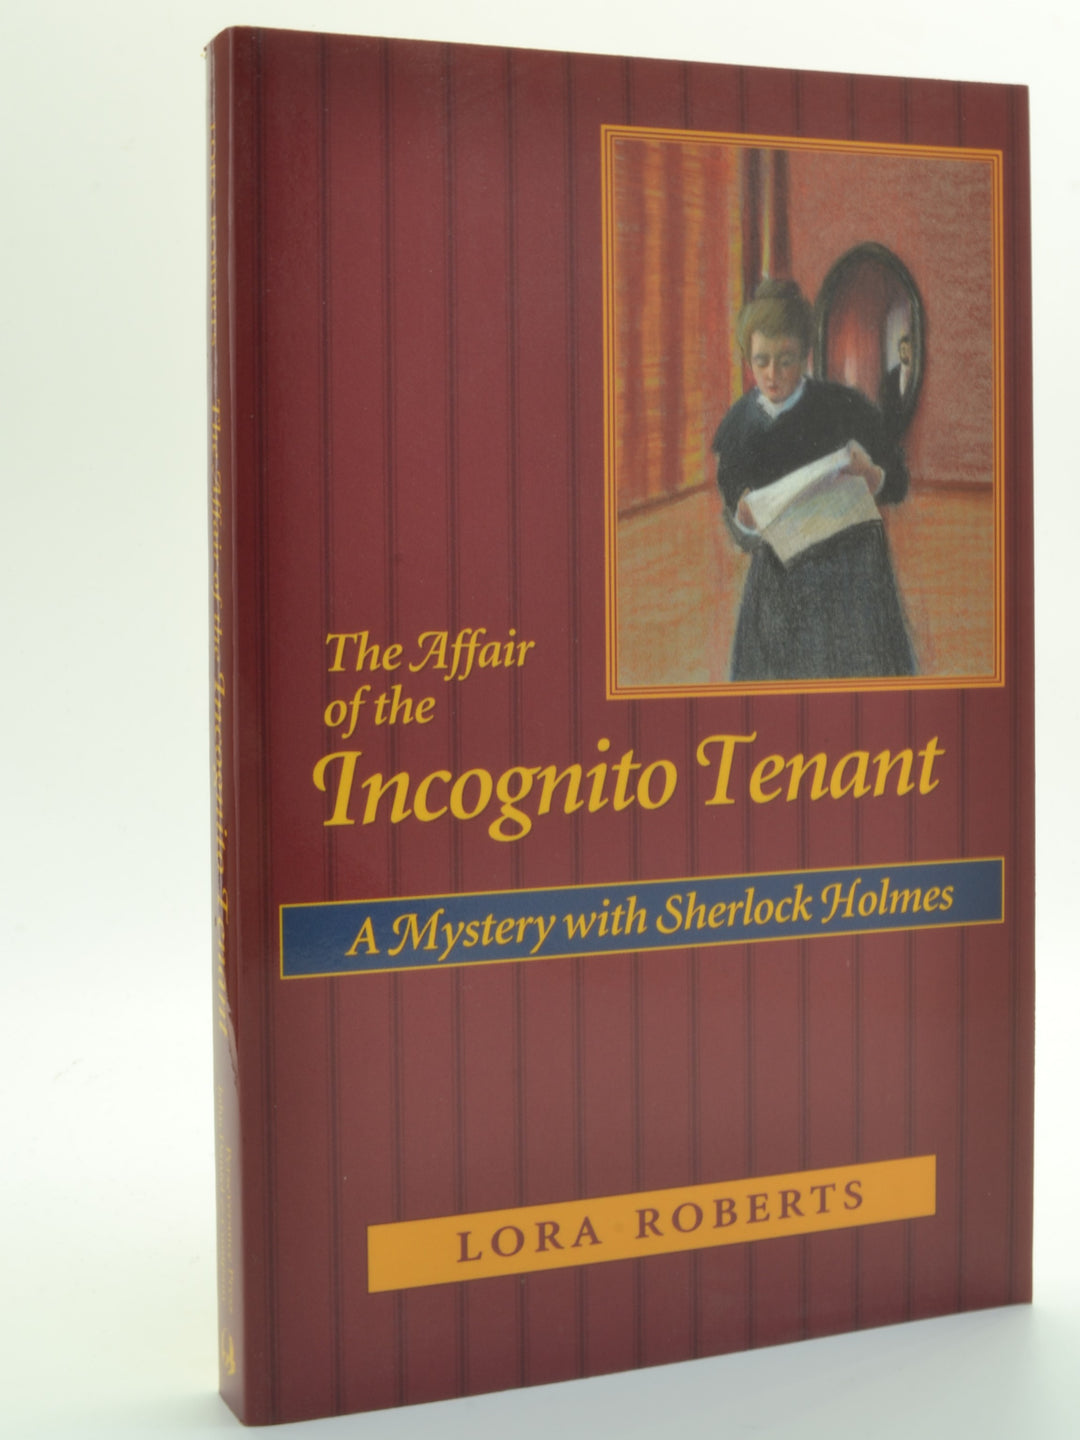 Roberts, Lora - The Affair of the Incognito Tenant | back cover